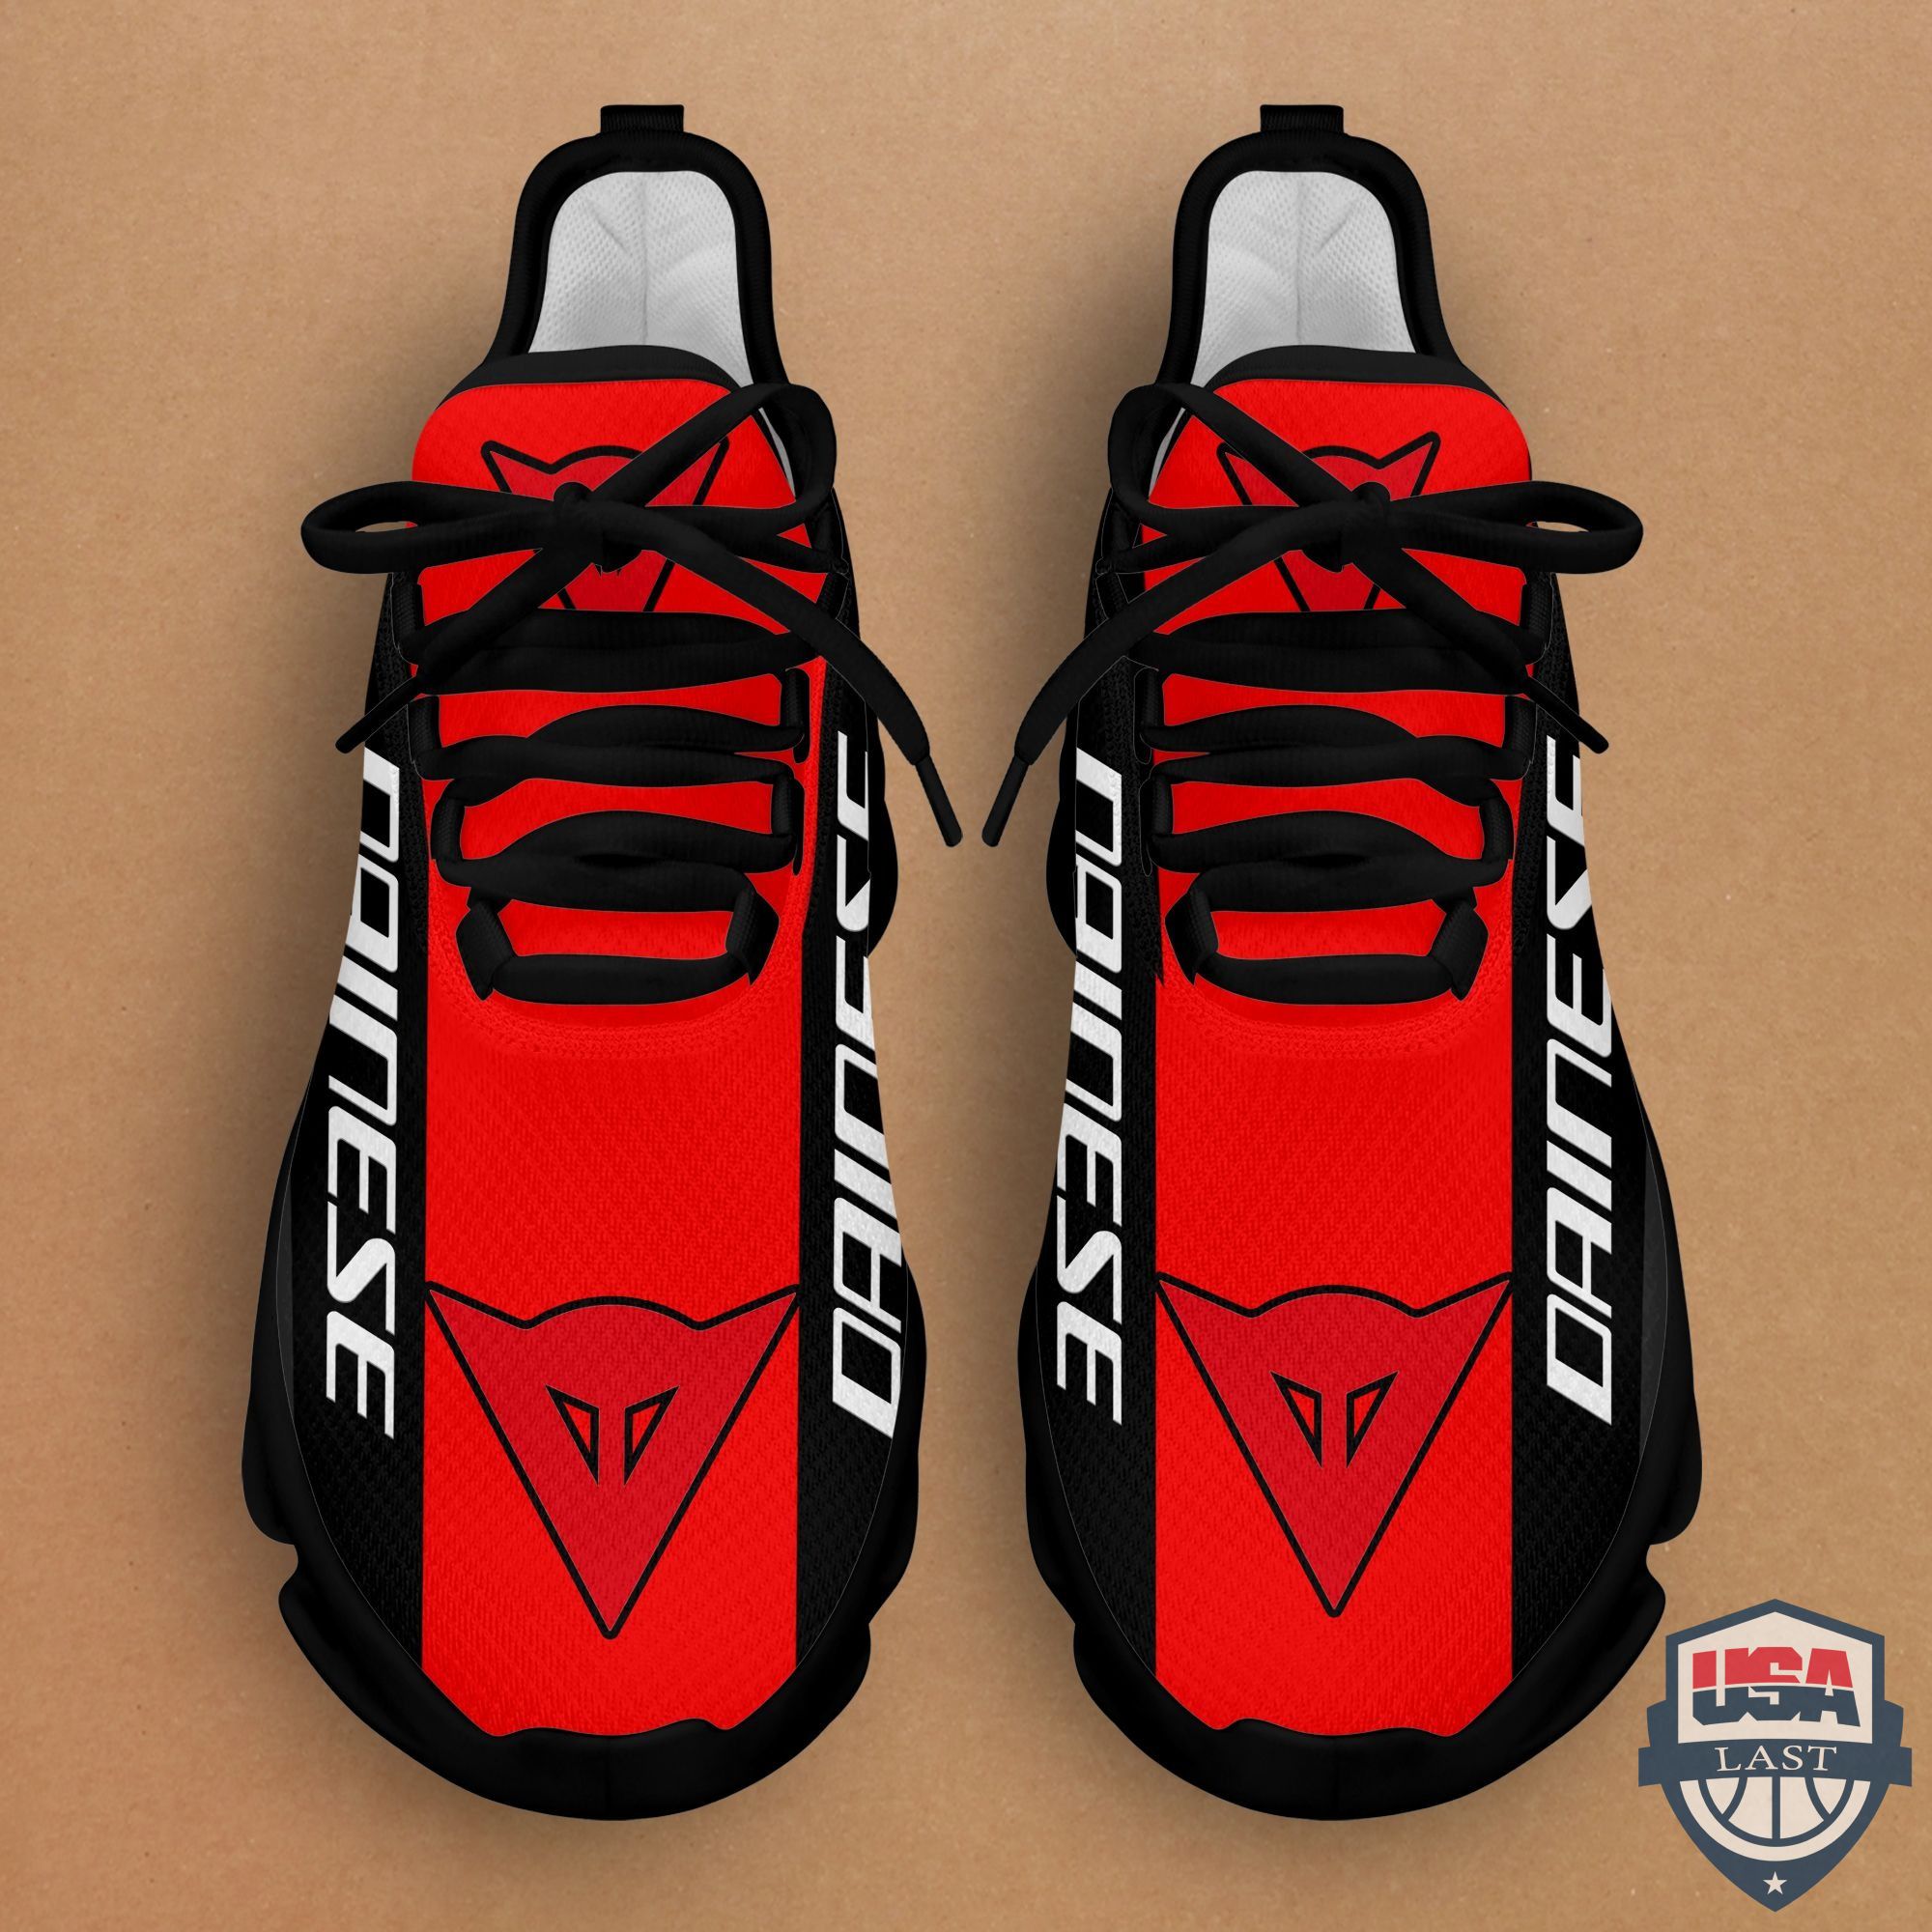 Dainese Running Shoes Red Version